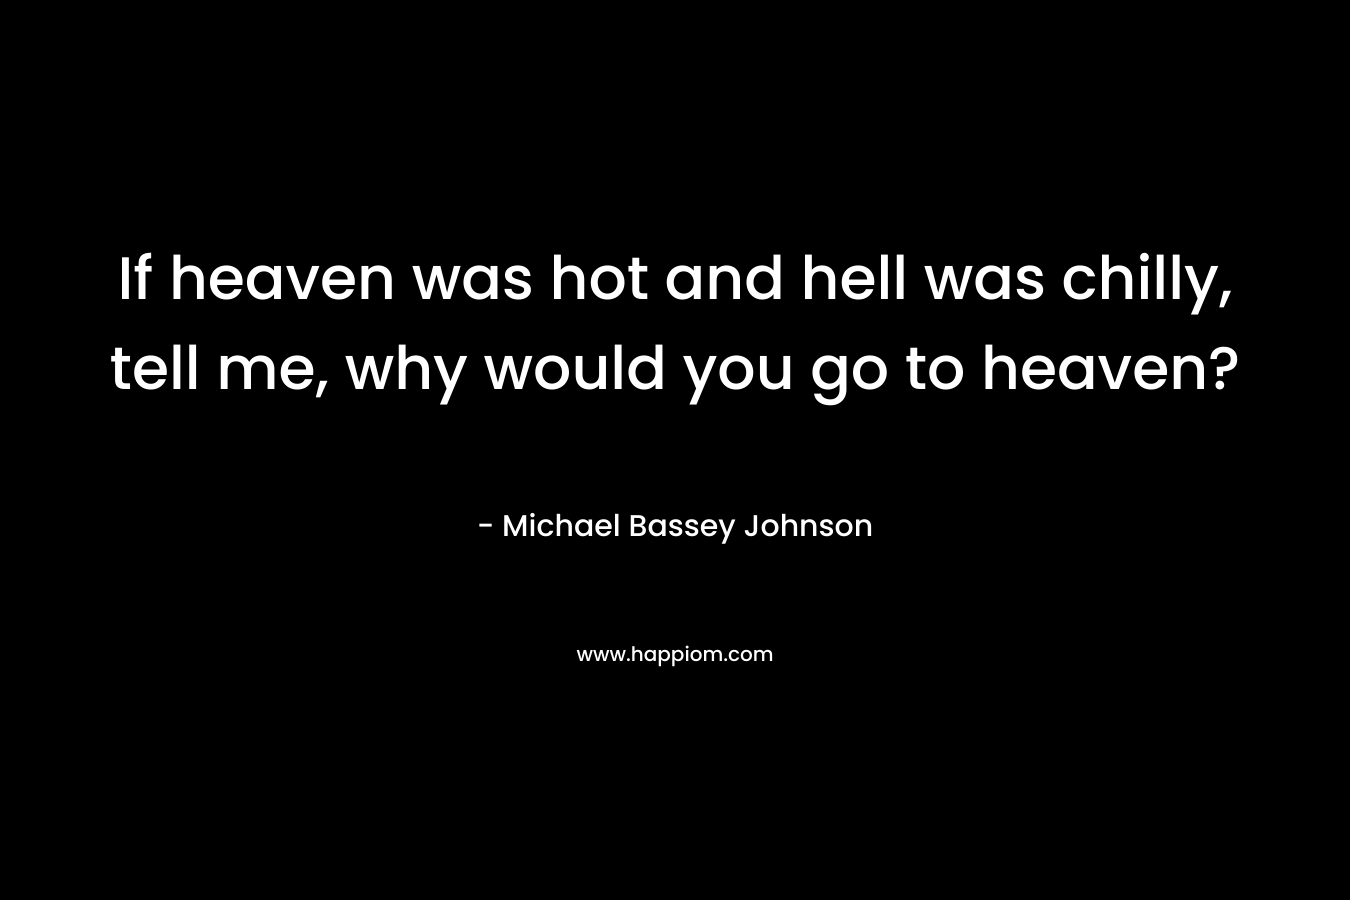 If heaven was hot and hell was chilly, tell me, why would you go to heaven?